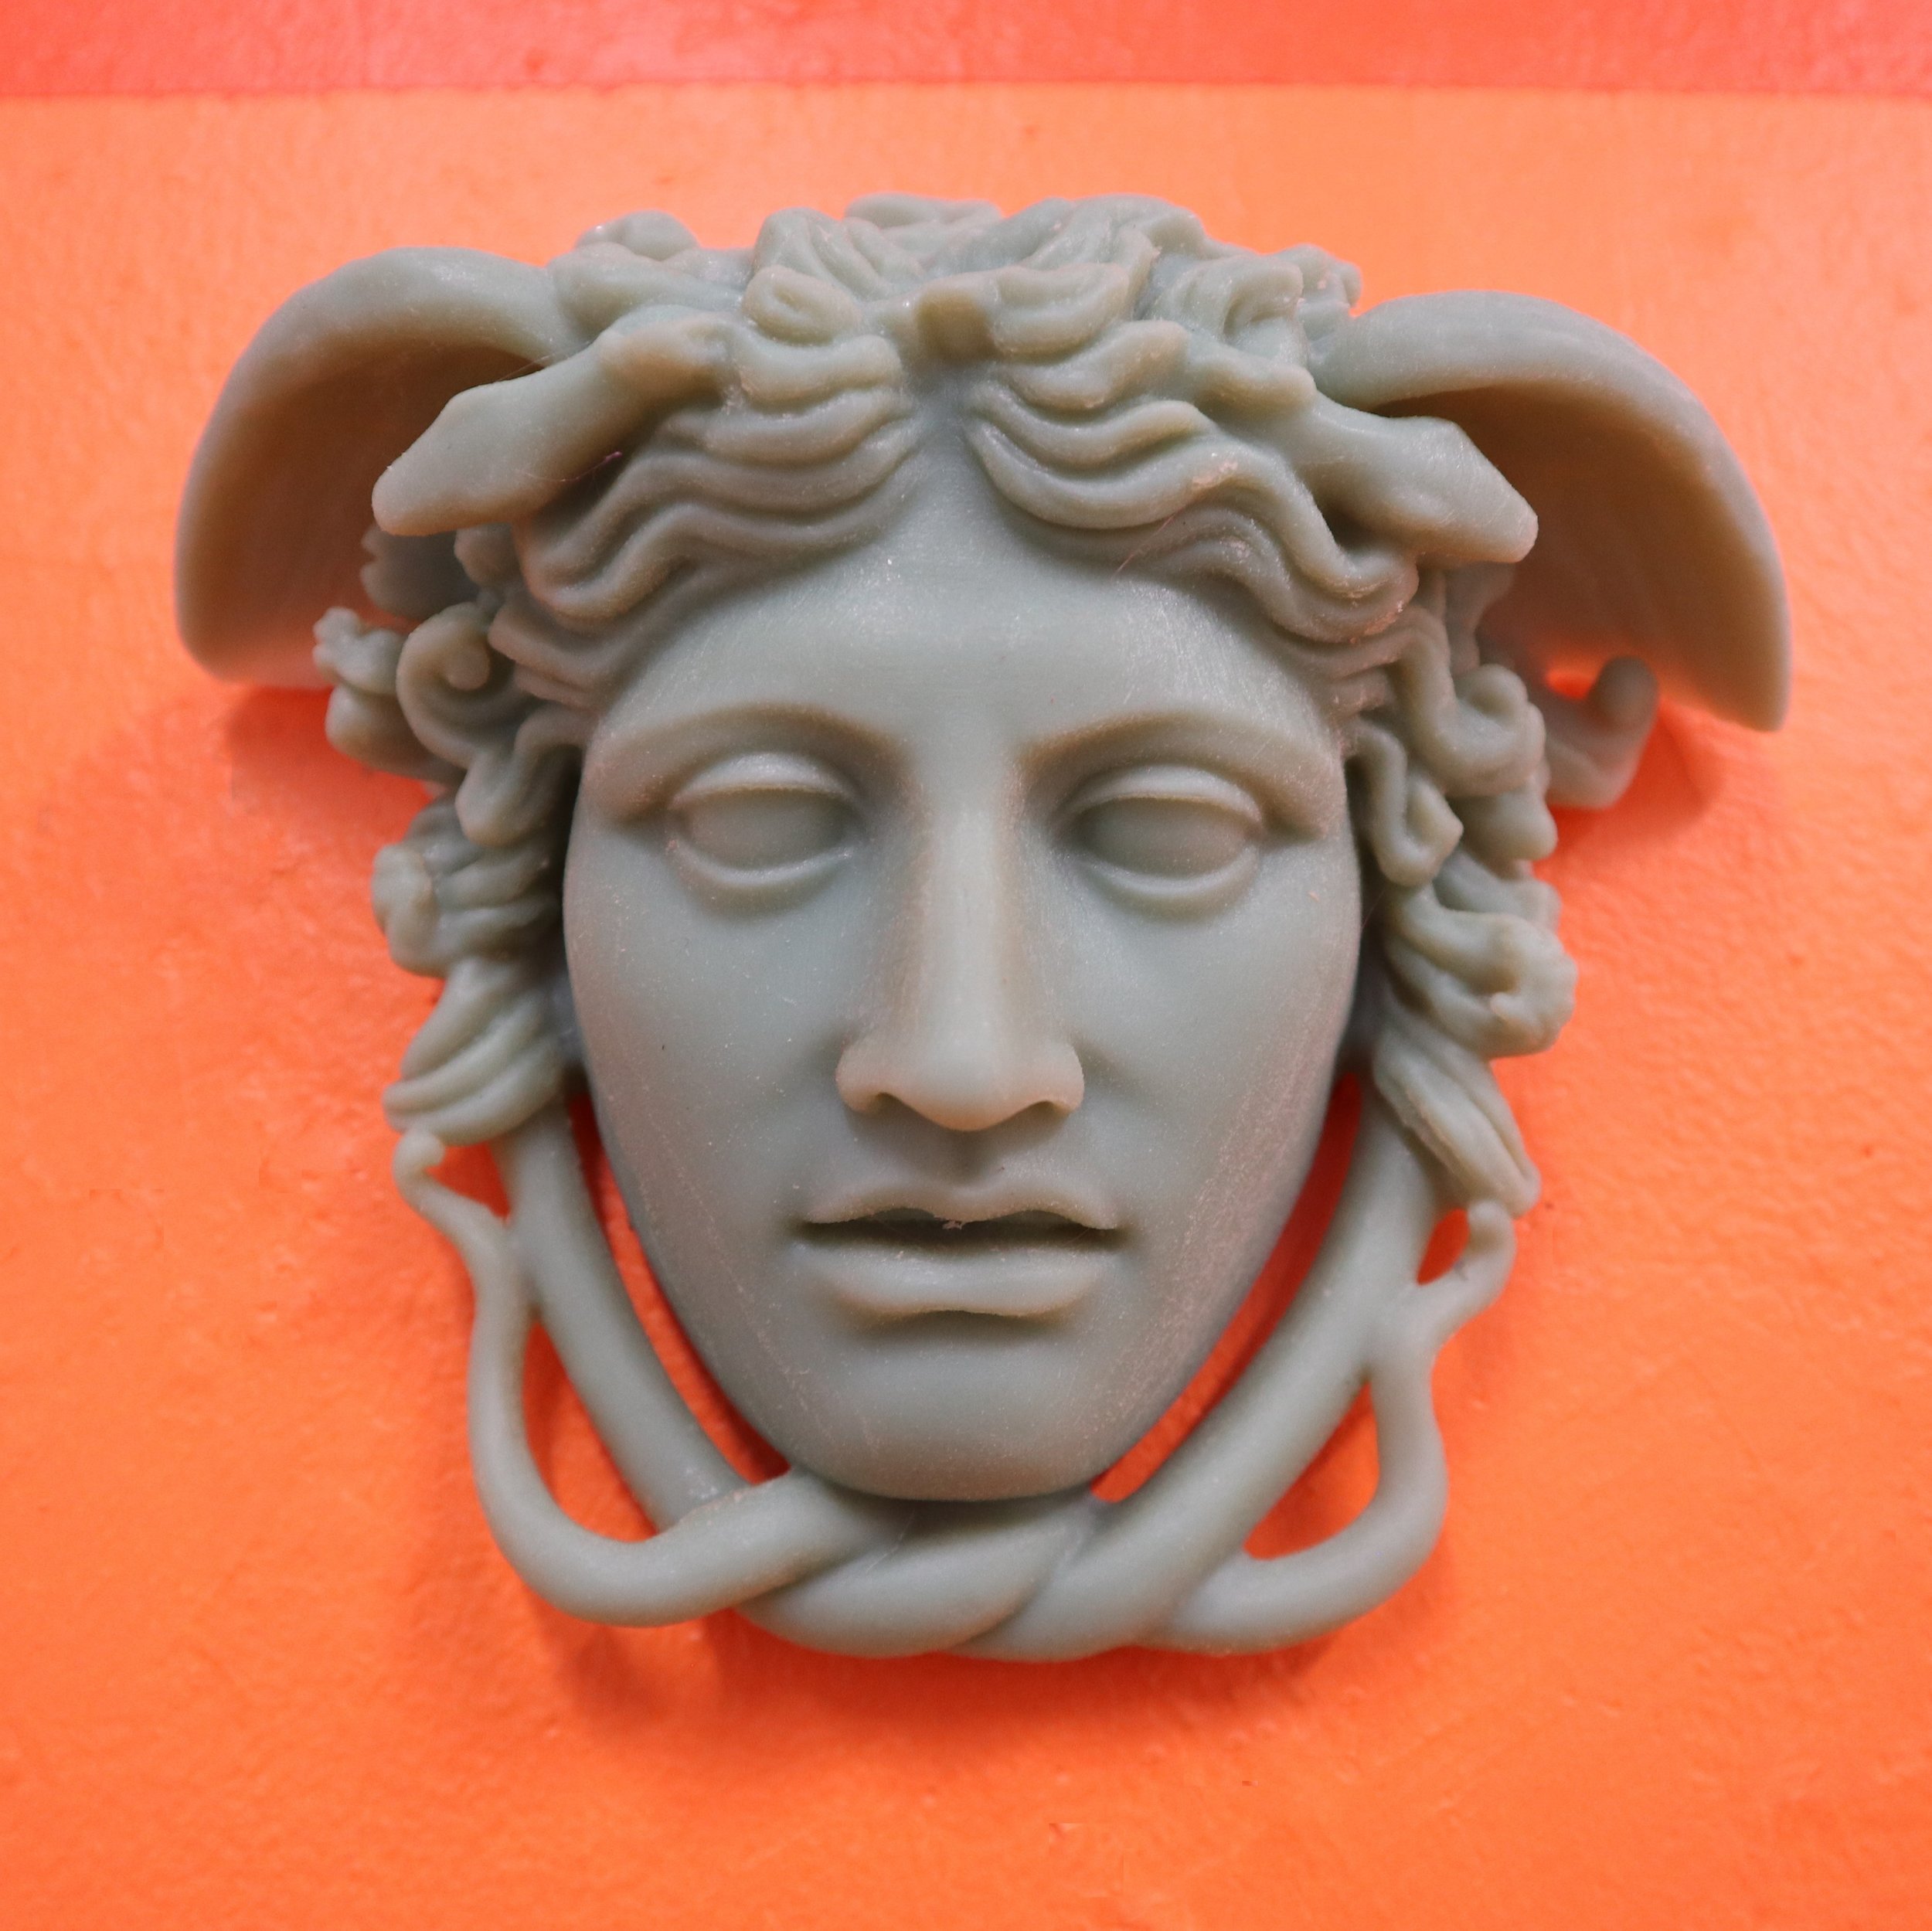   The_Medusa_Rondanini   2018  photopolymer 3D print  3D print made secretly in military contractor’s printing lab using model design by Cosmo Wenman under Creative Commons license 